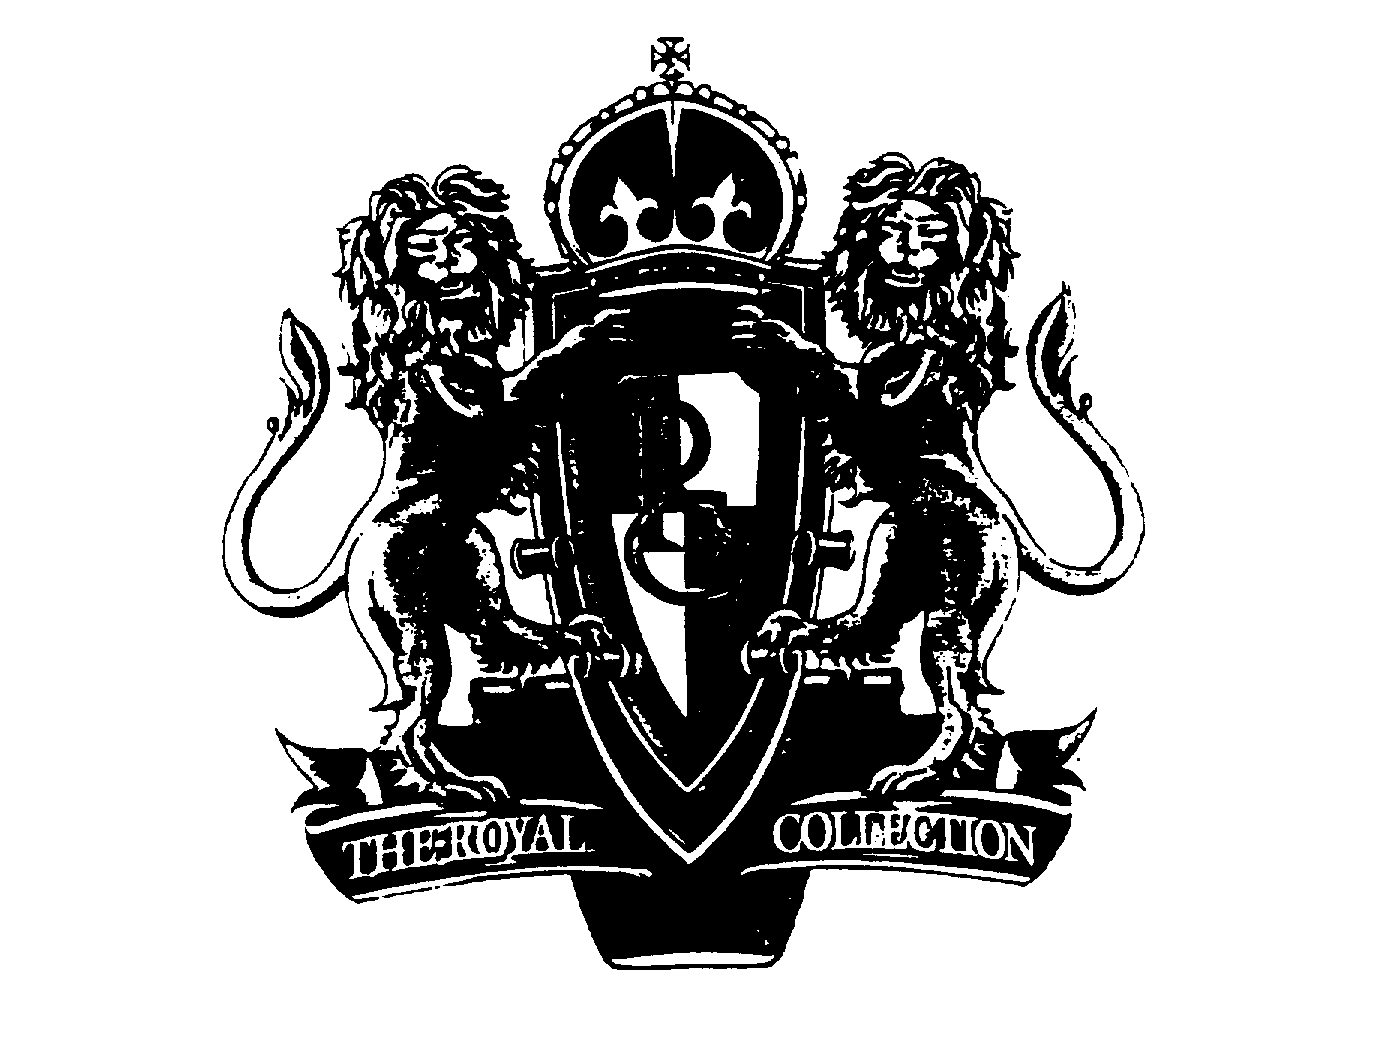 THE ROYAL COLLECTION